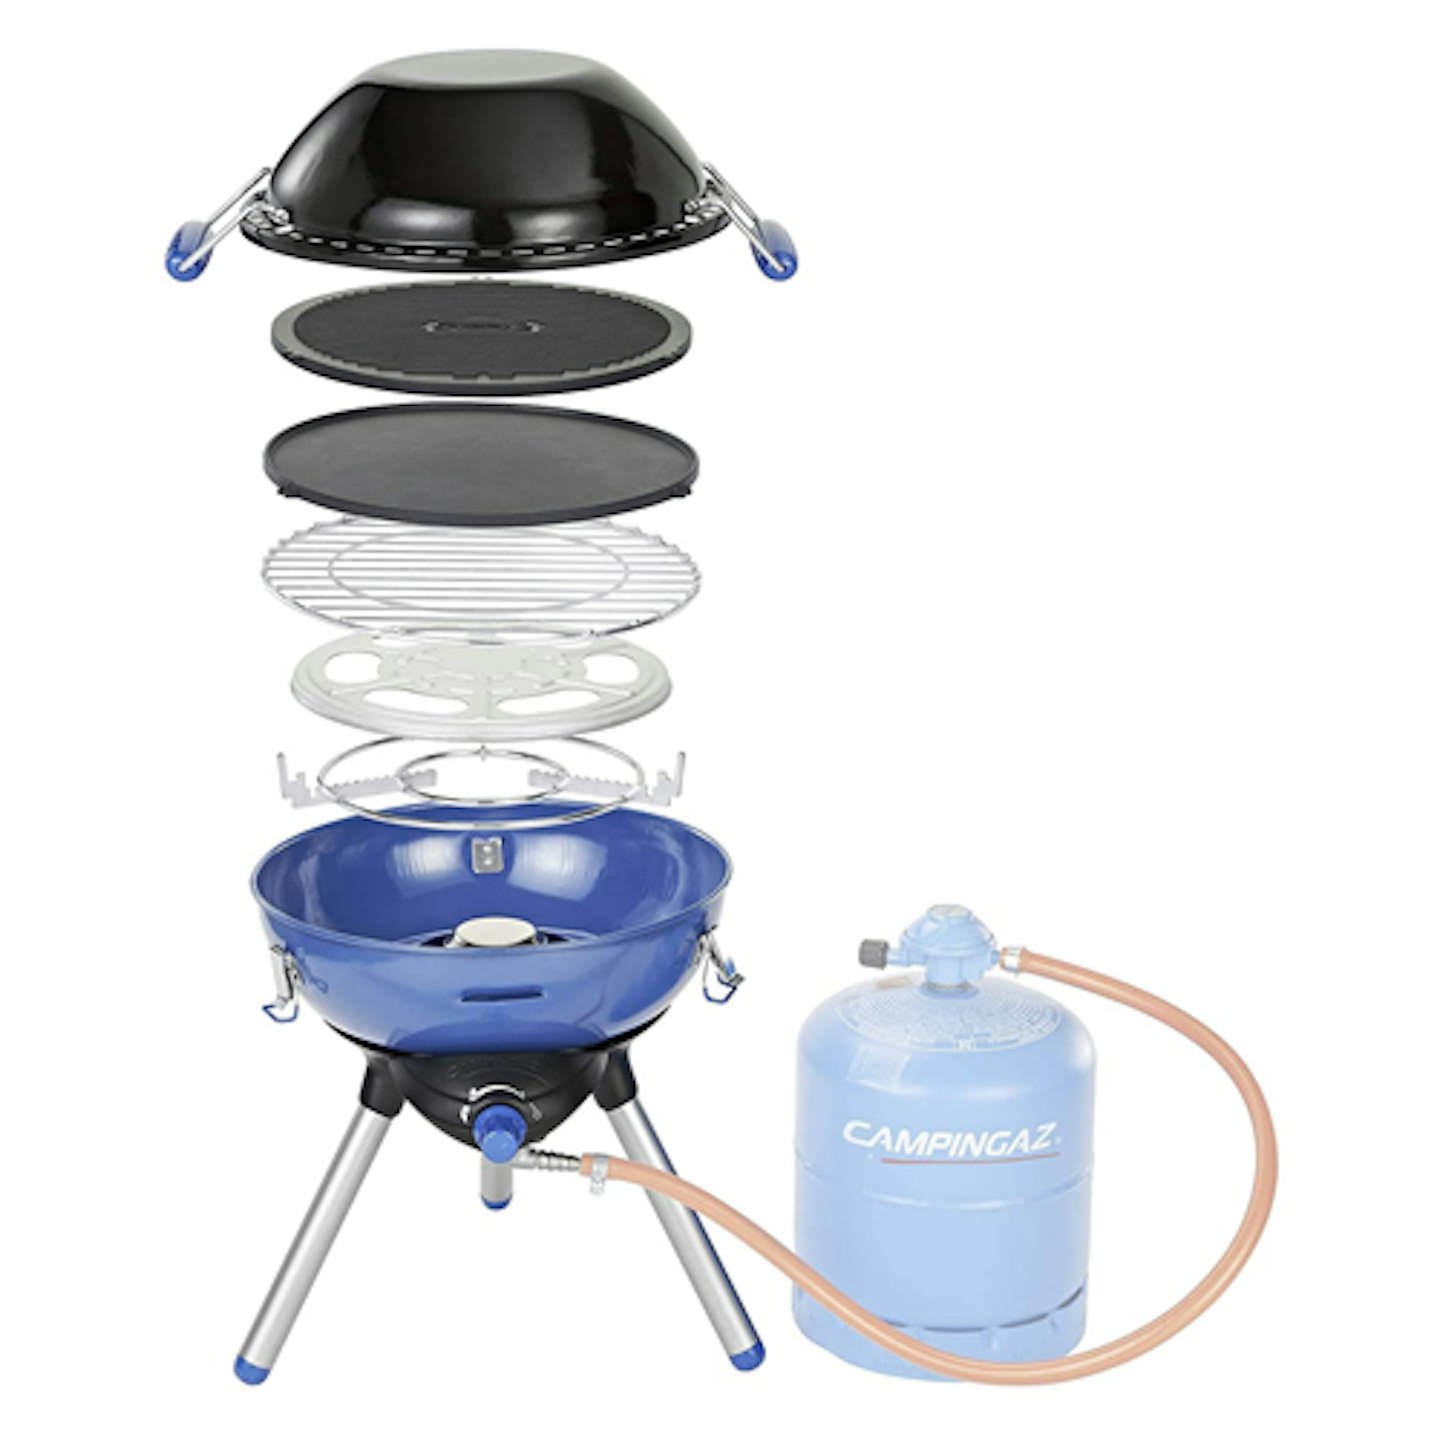 Campingaz Party Grill Gas Stove